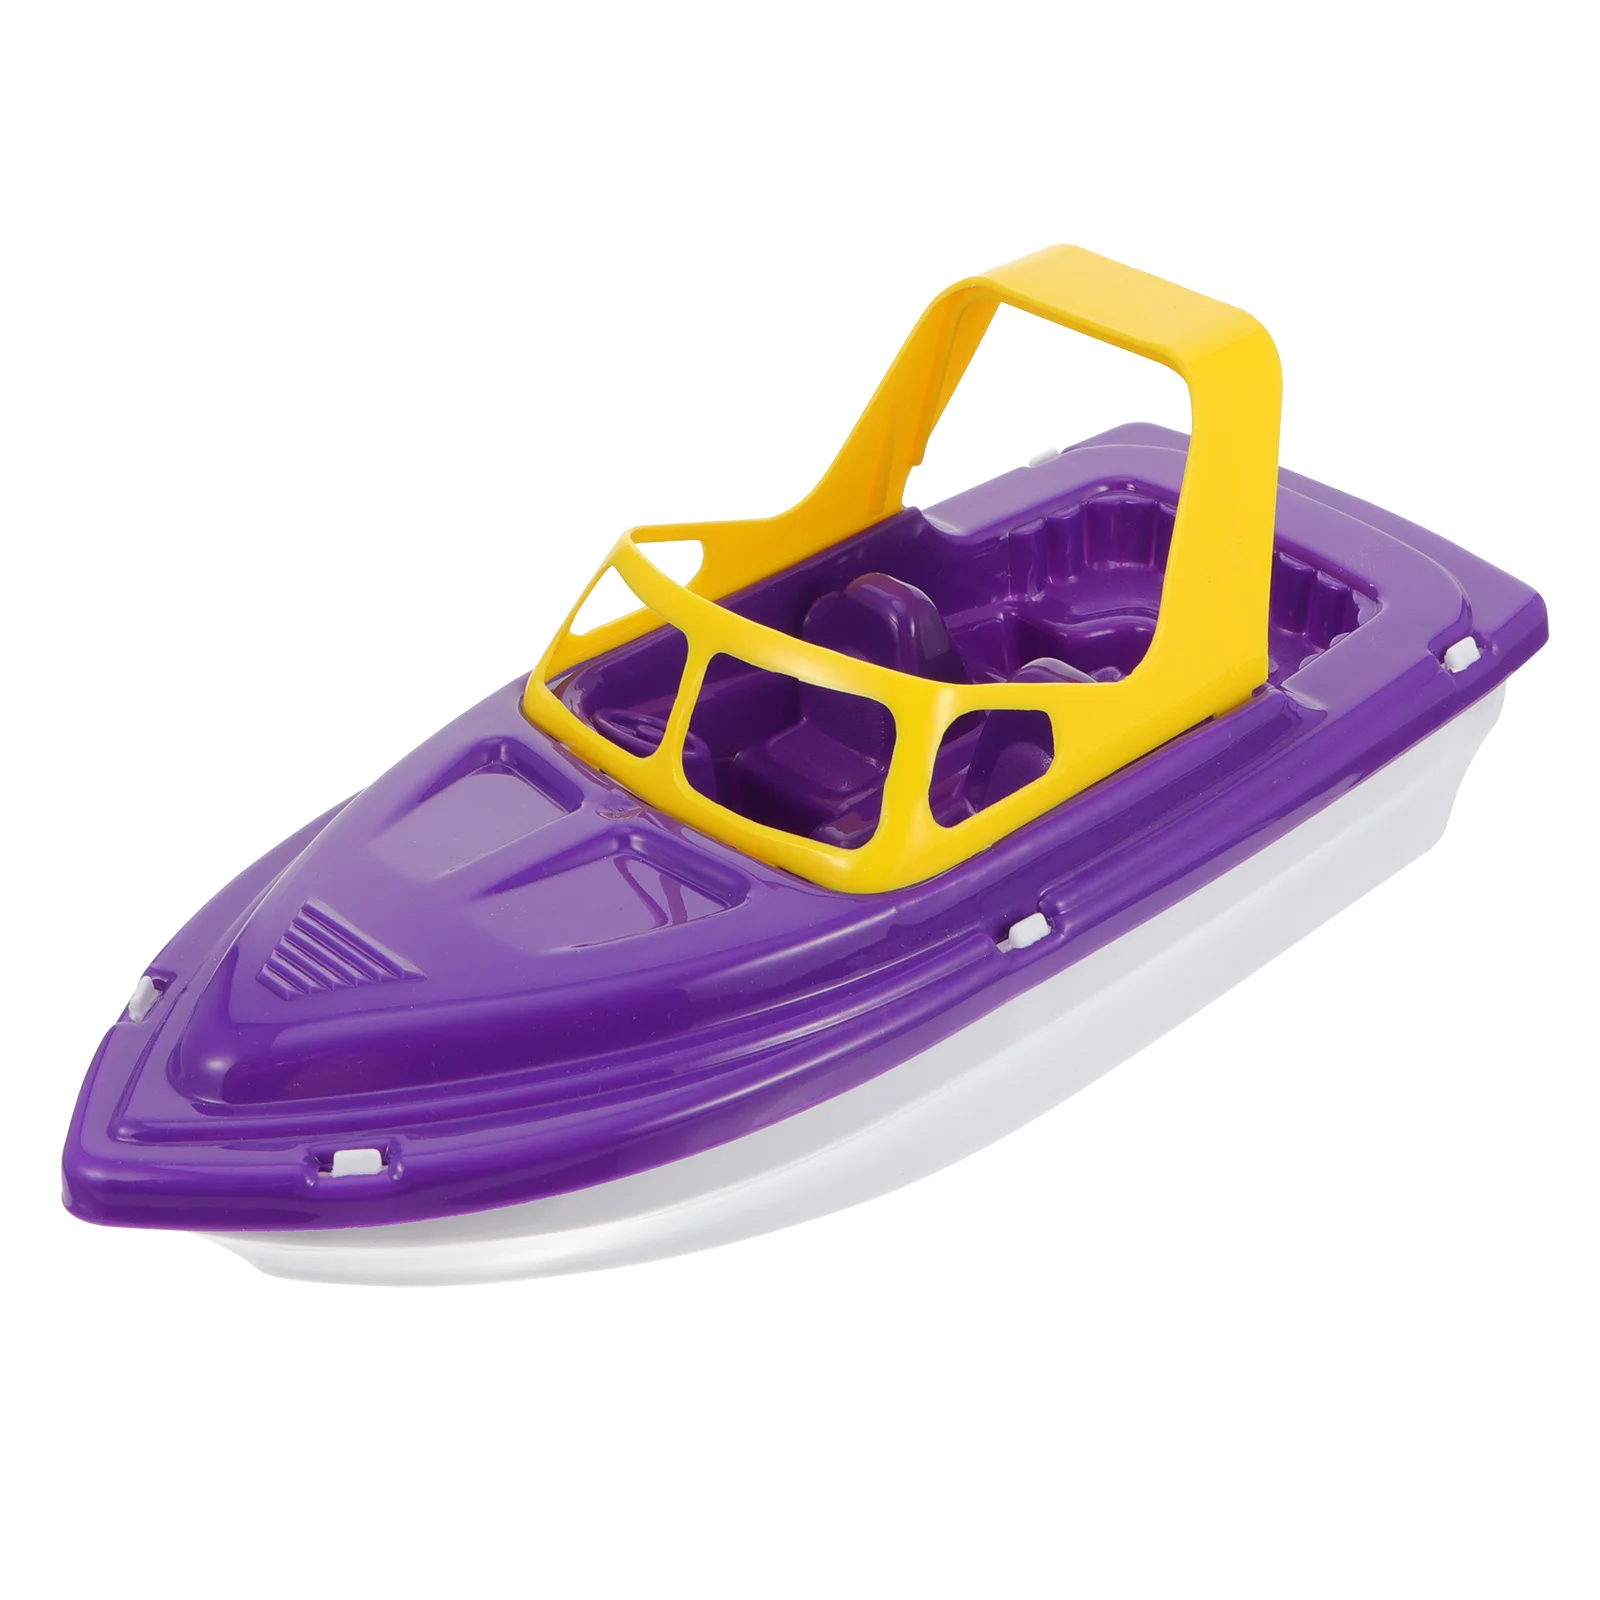 

1pc Plastic Speedboat Toy Baby Water Playing Toy Kid Sand Beach Playthings Bath